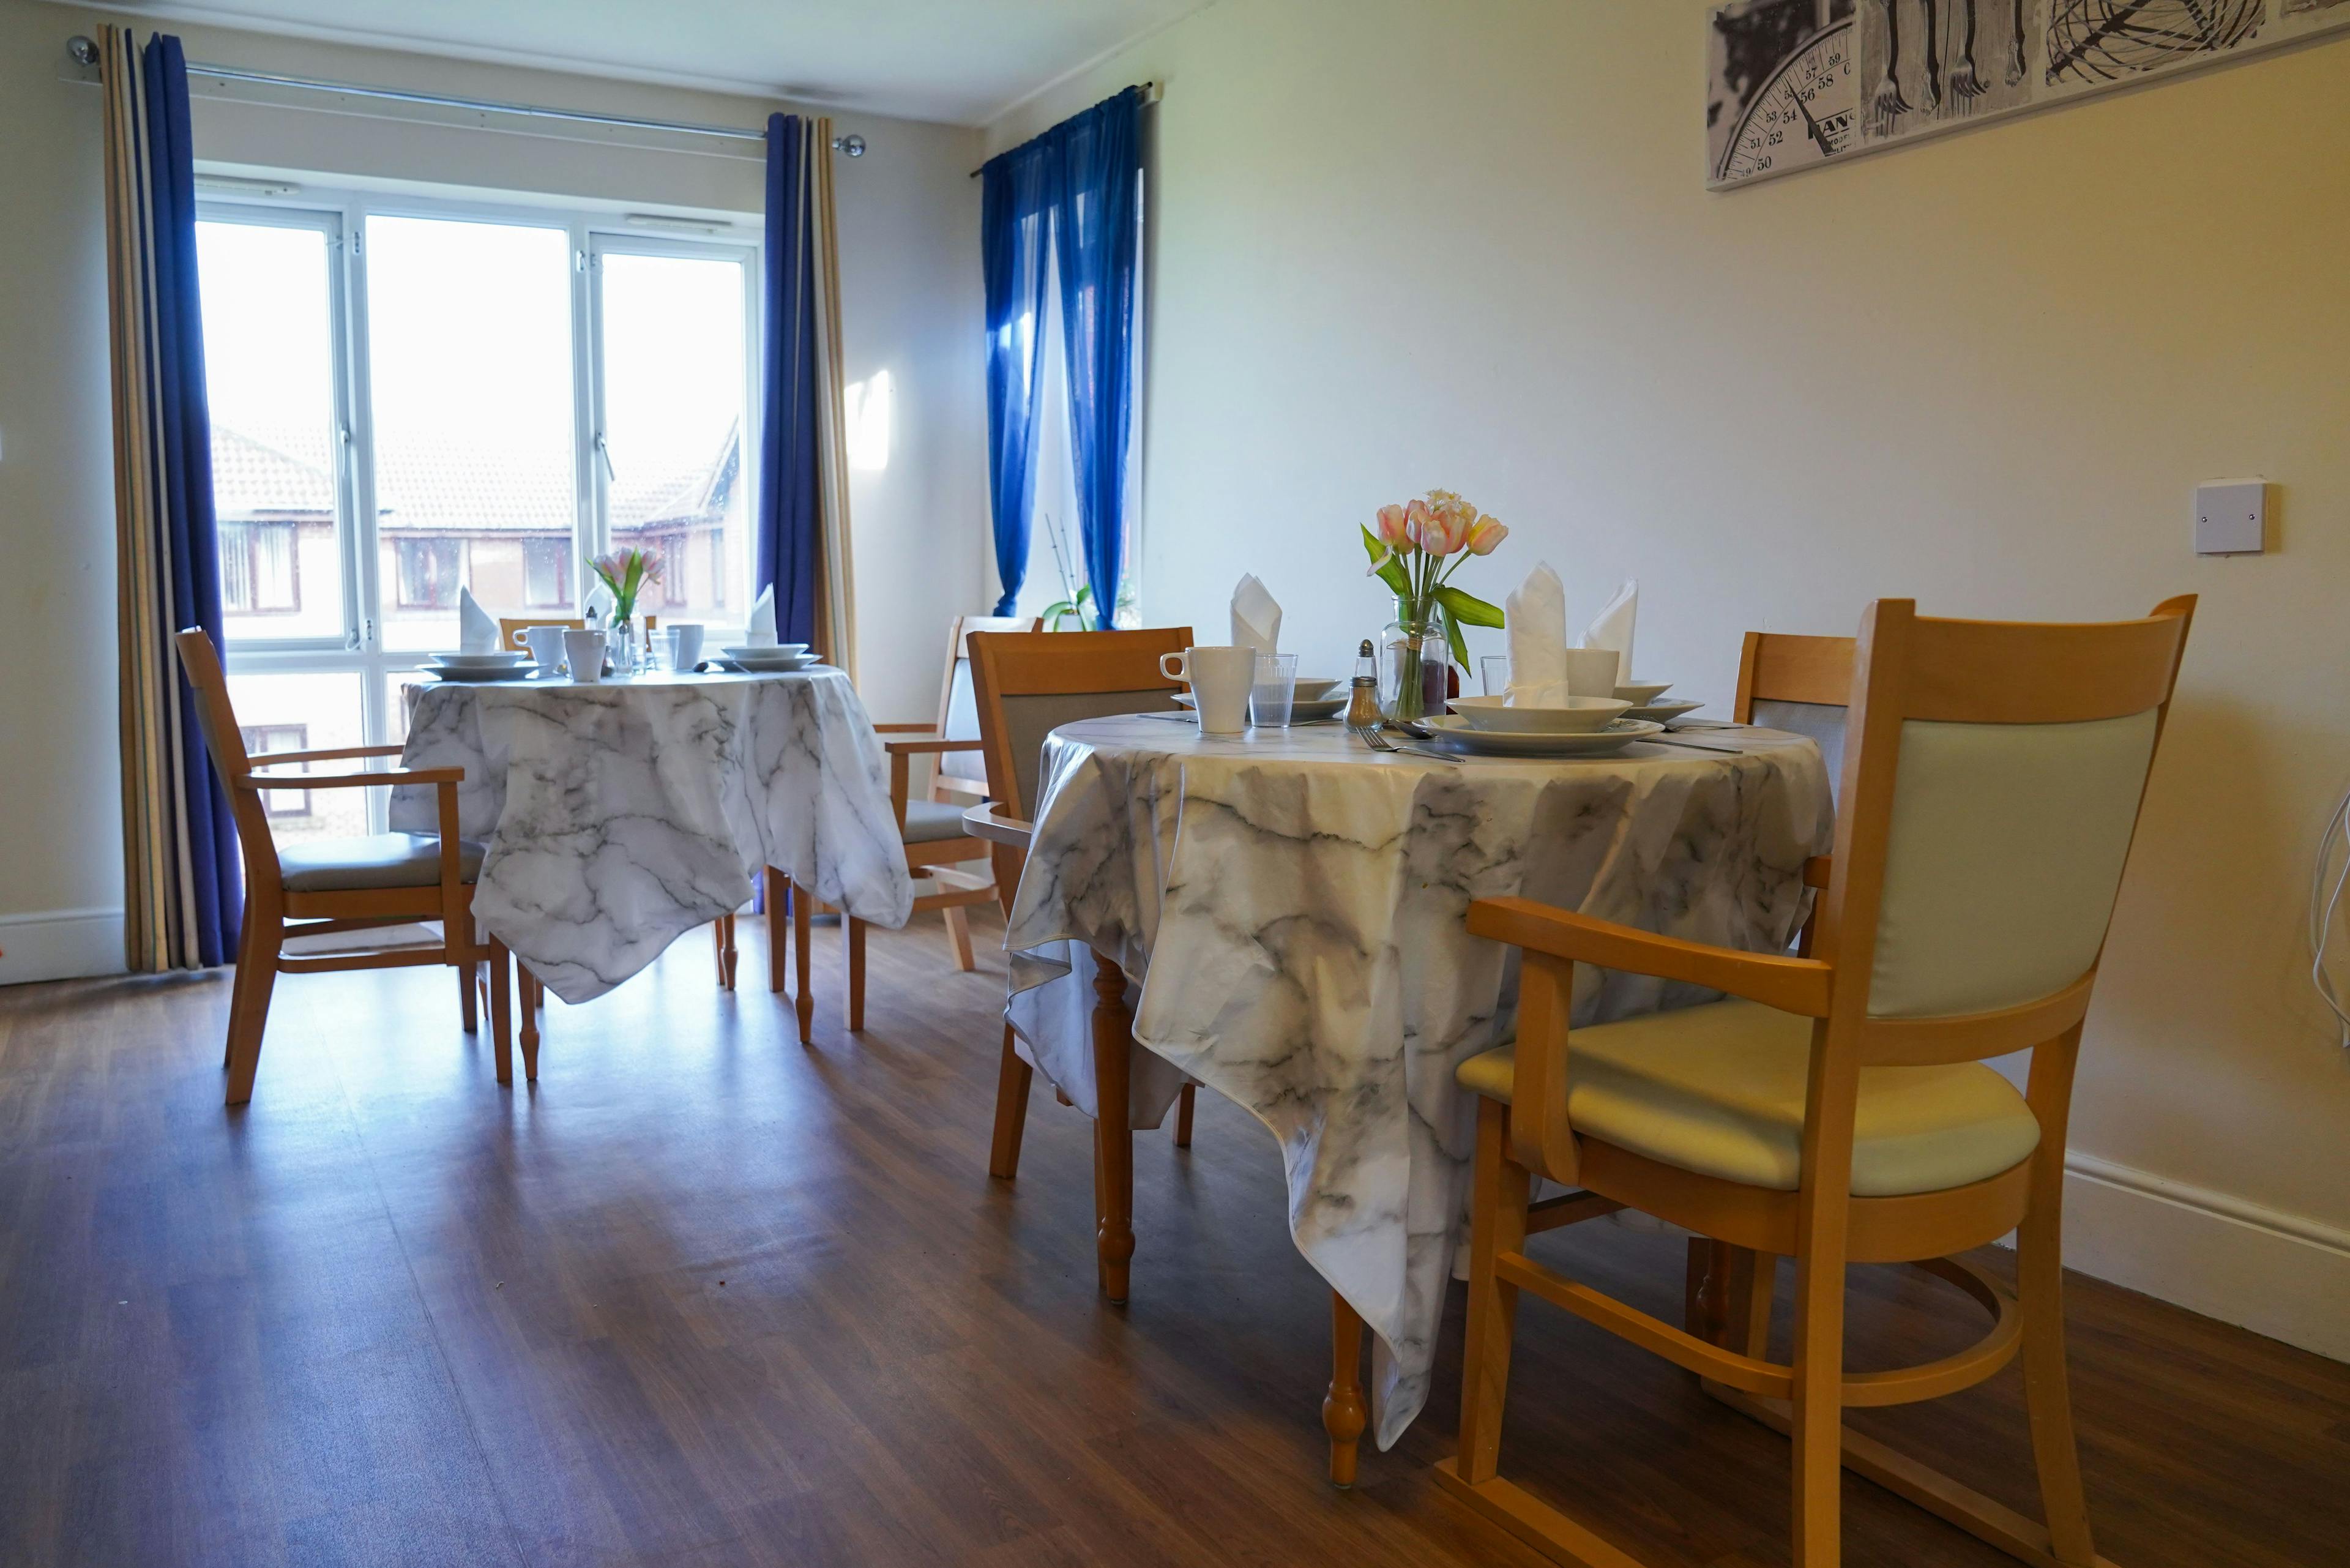 Dining Room at Cedar Court Care Home in Seaham, County of Durham